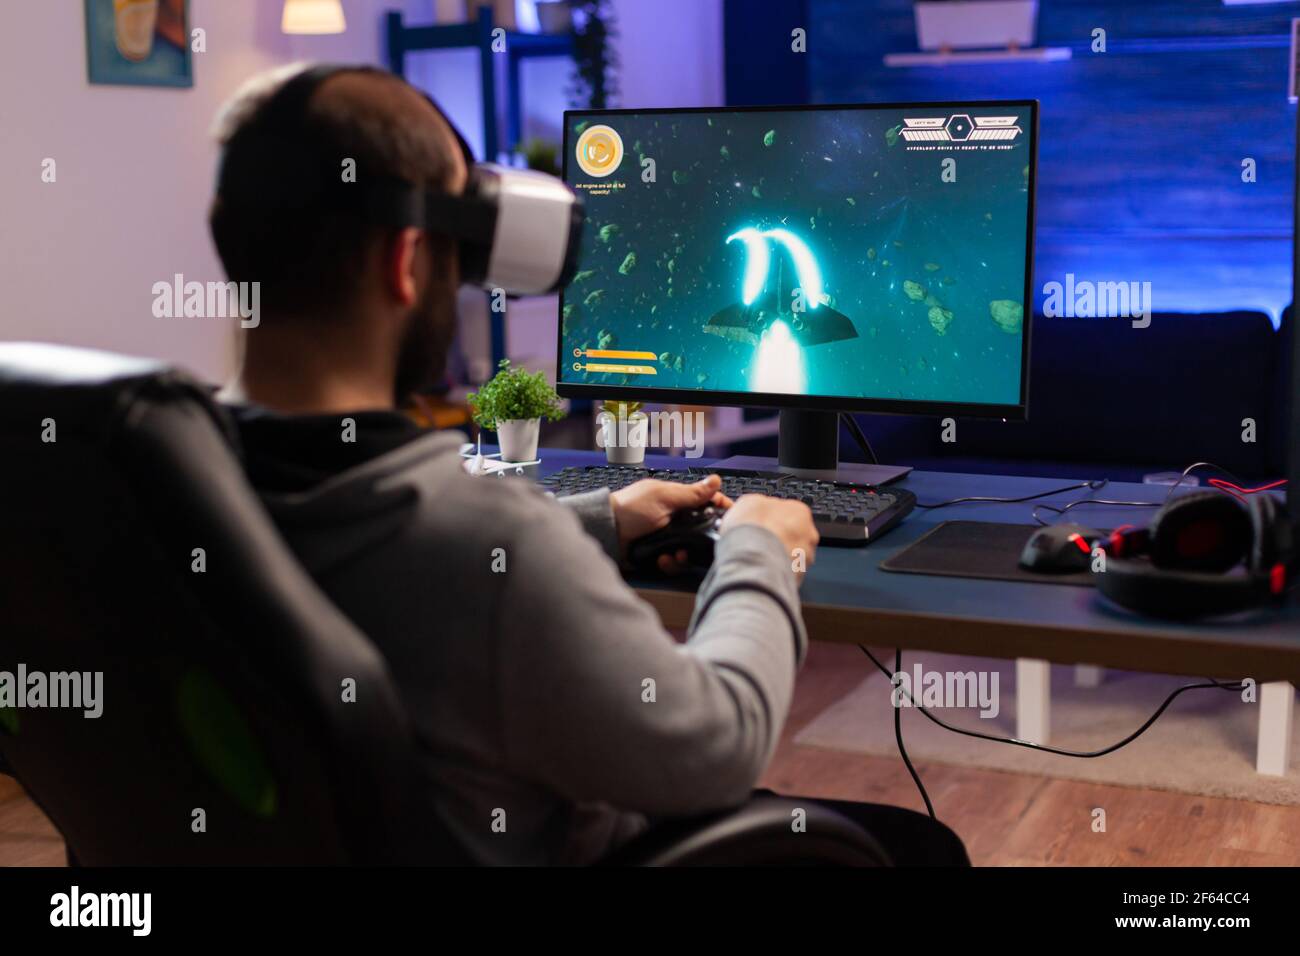 Professional gamer wearing virtual realilty headset and playing space shooter video games with controller